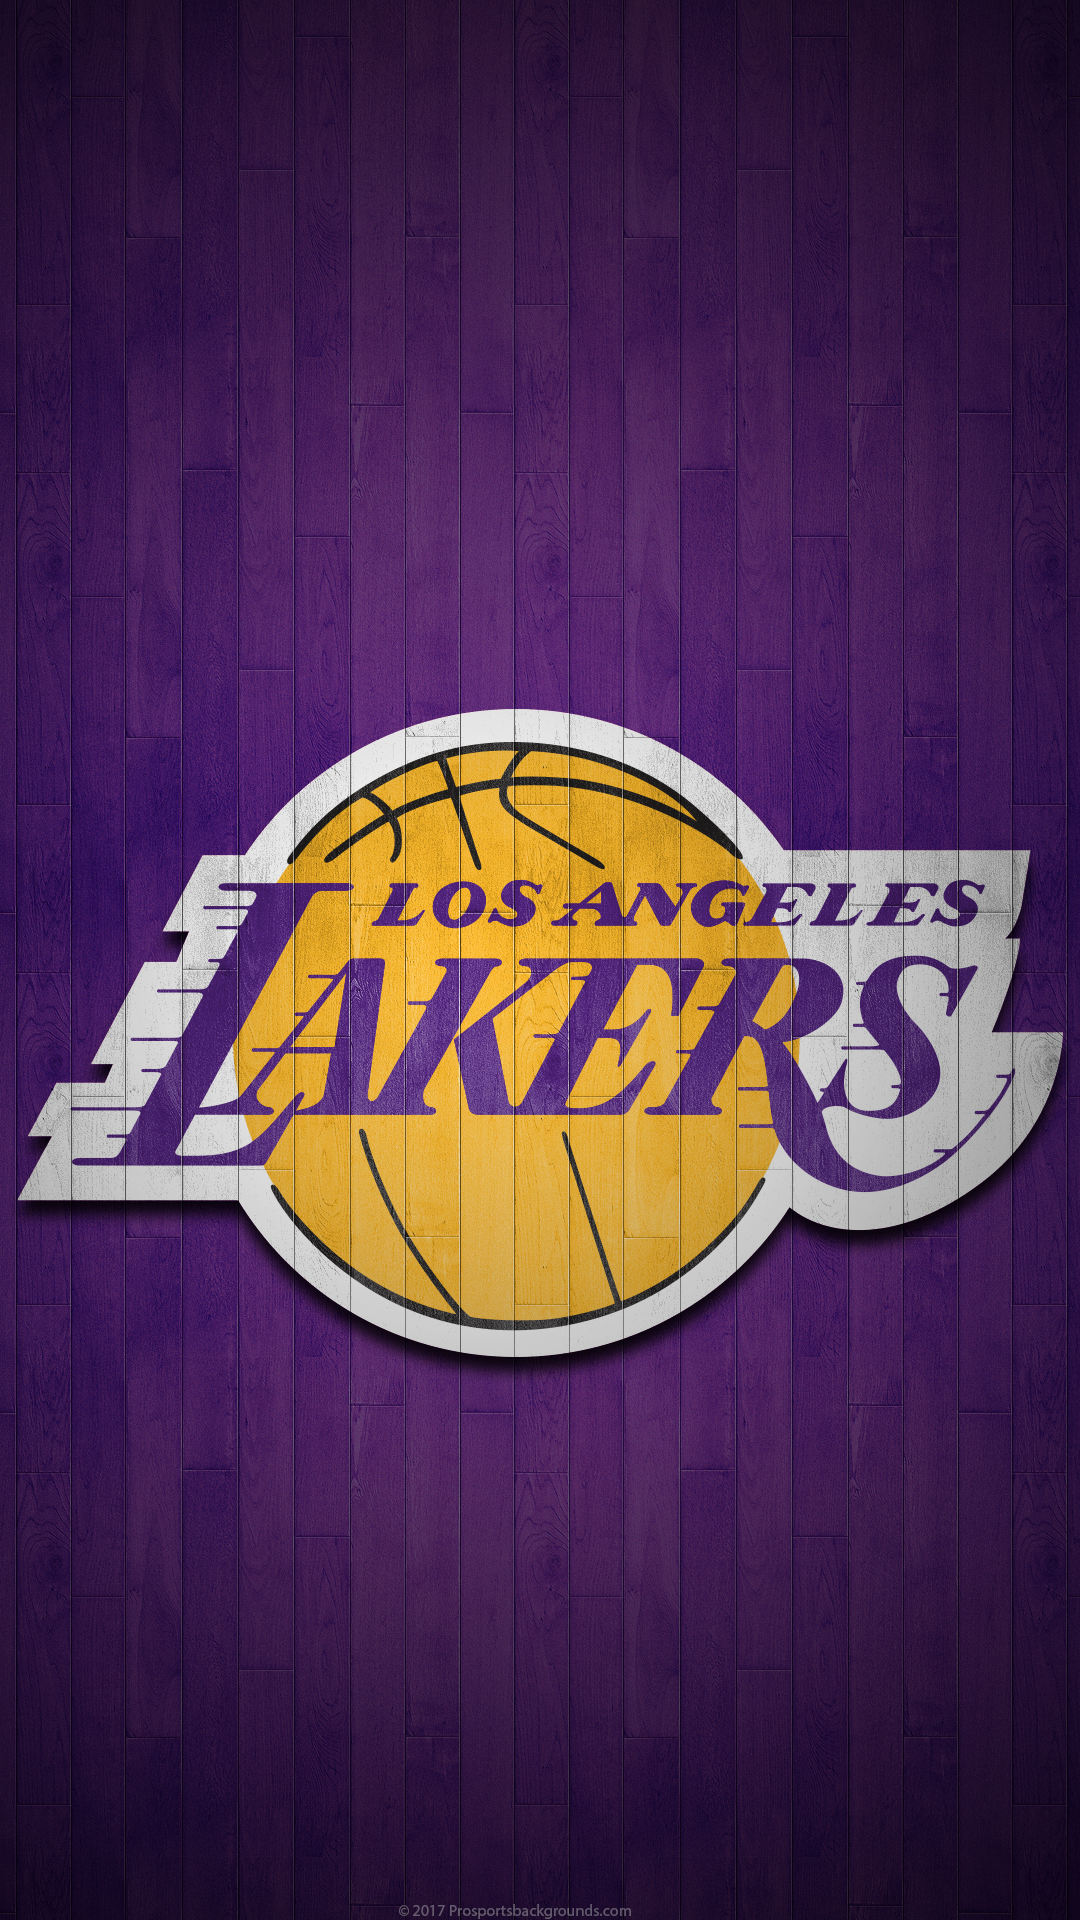 Free Download 2018 Los Angeles Lakers Wallpapers Pc Iphone Android 1080x1920 For Your Desktop Mobile Tablet Explore 38 Los Angeles Lakers Wallpapers Los Angeles Lakers Wallpapers Los Angeles Lakers